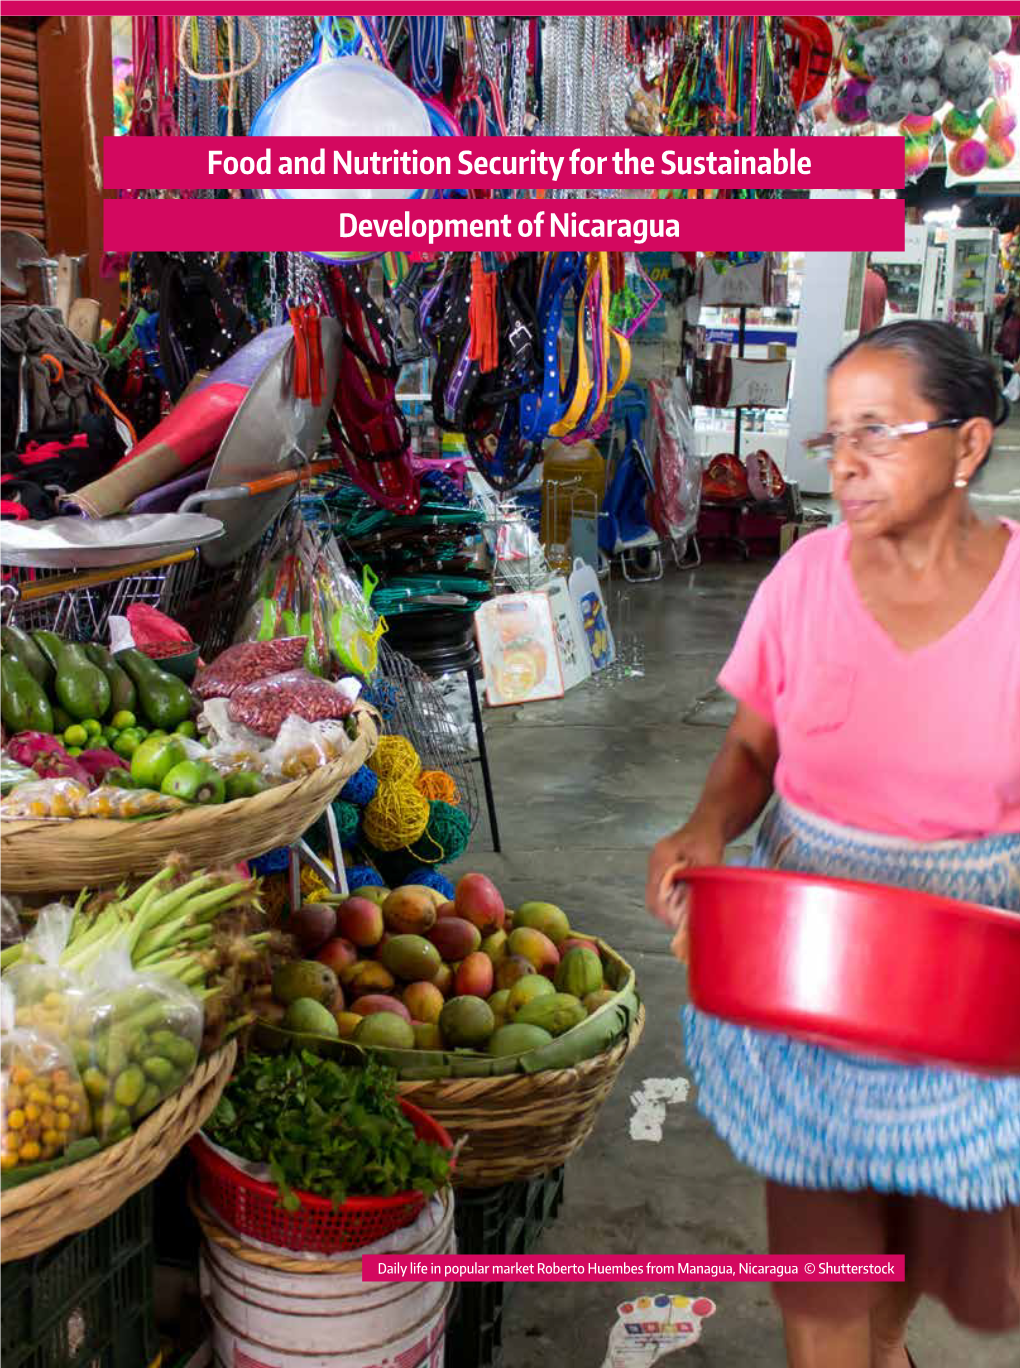 Food and Nutrition Security for the Sustainable Development of Nicaragua